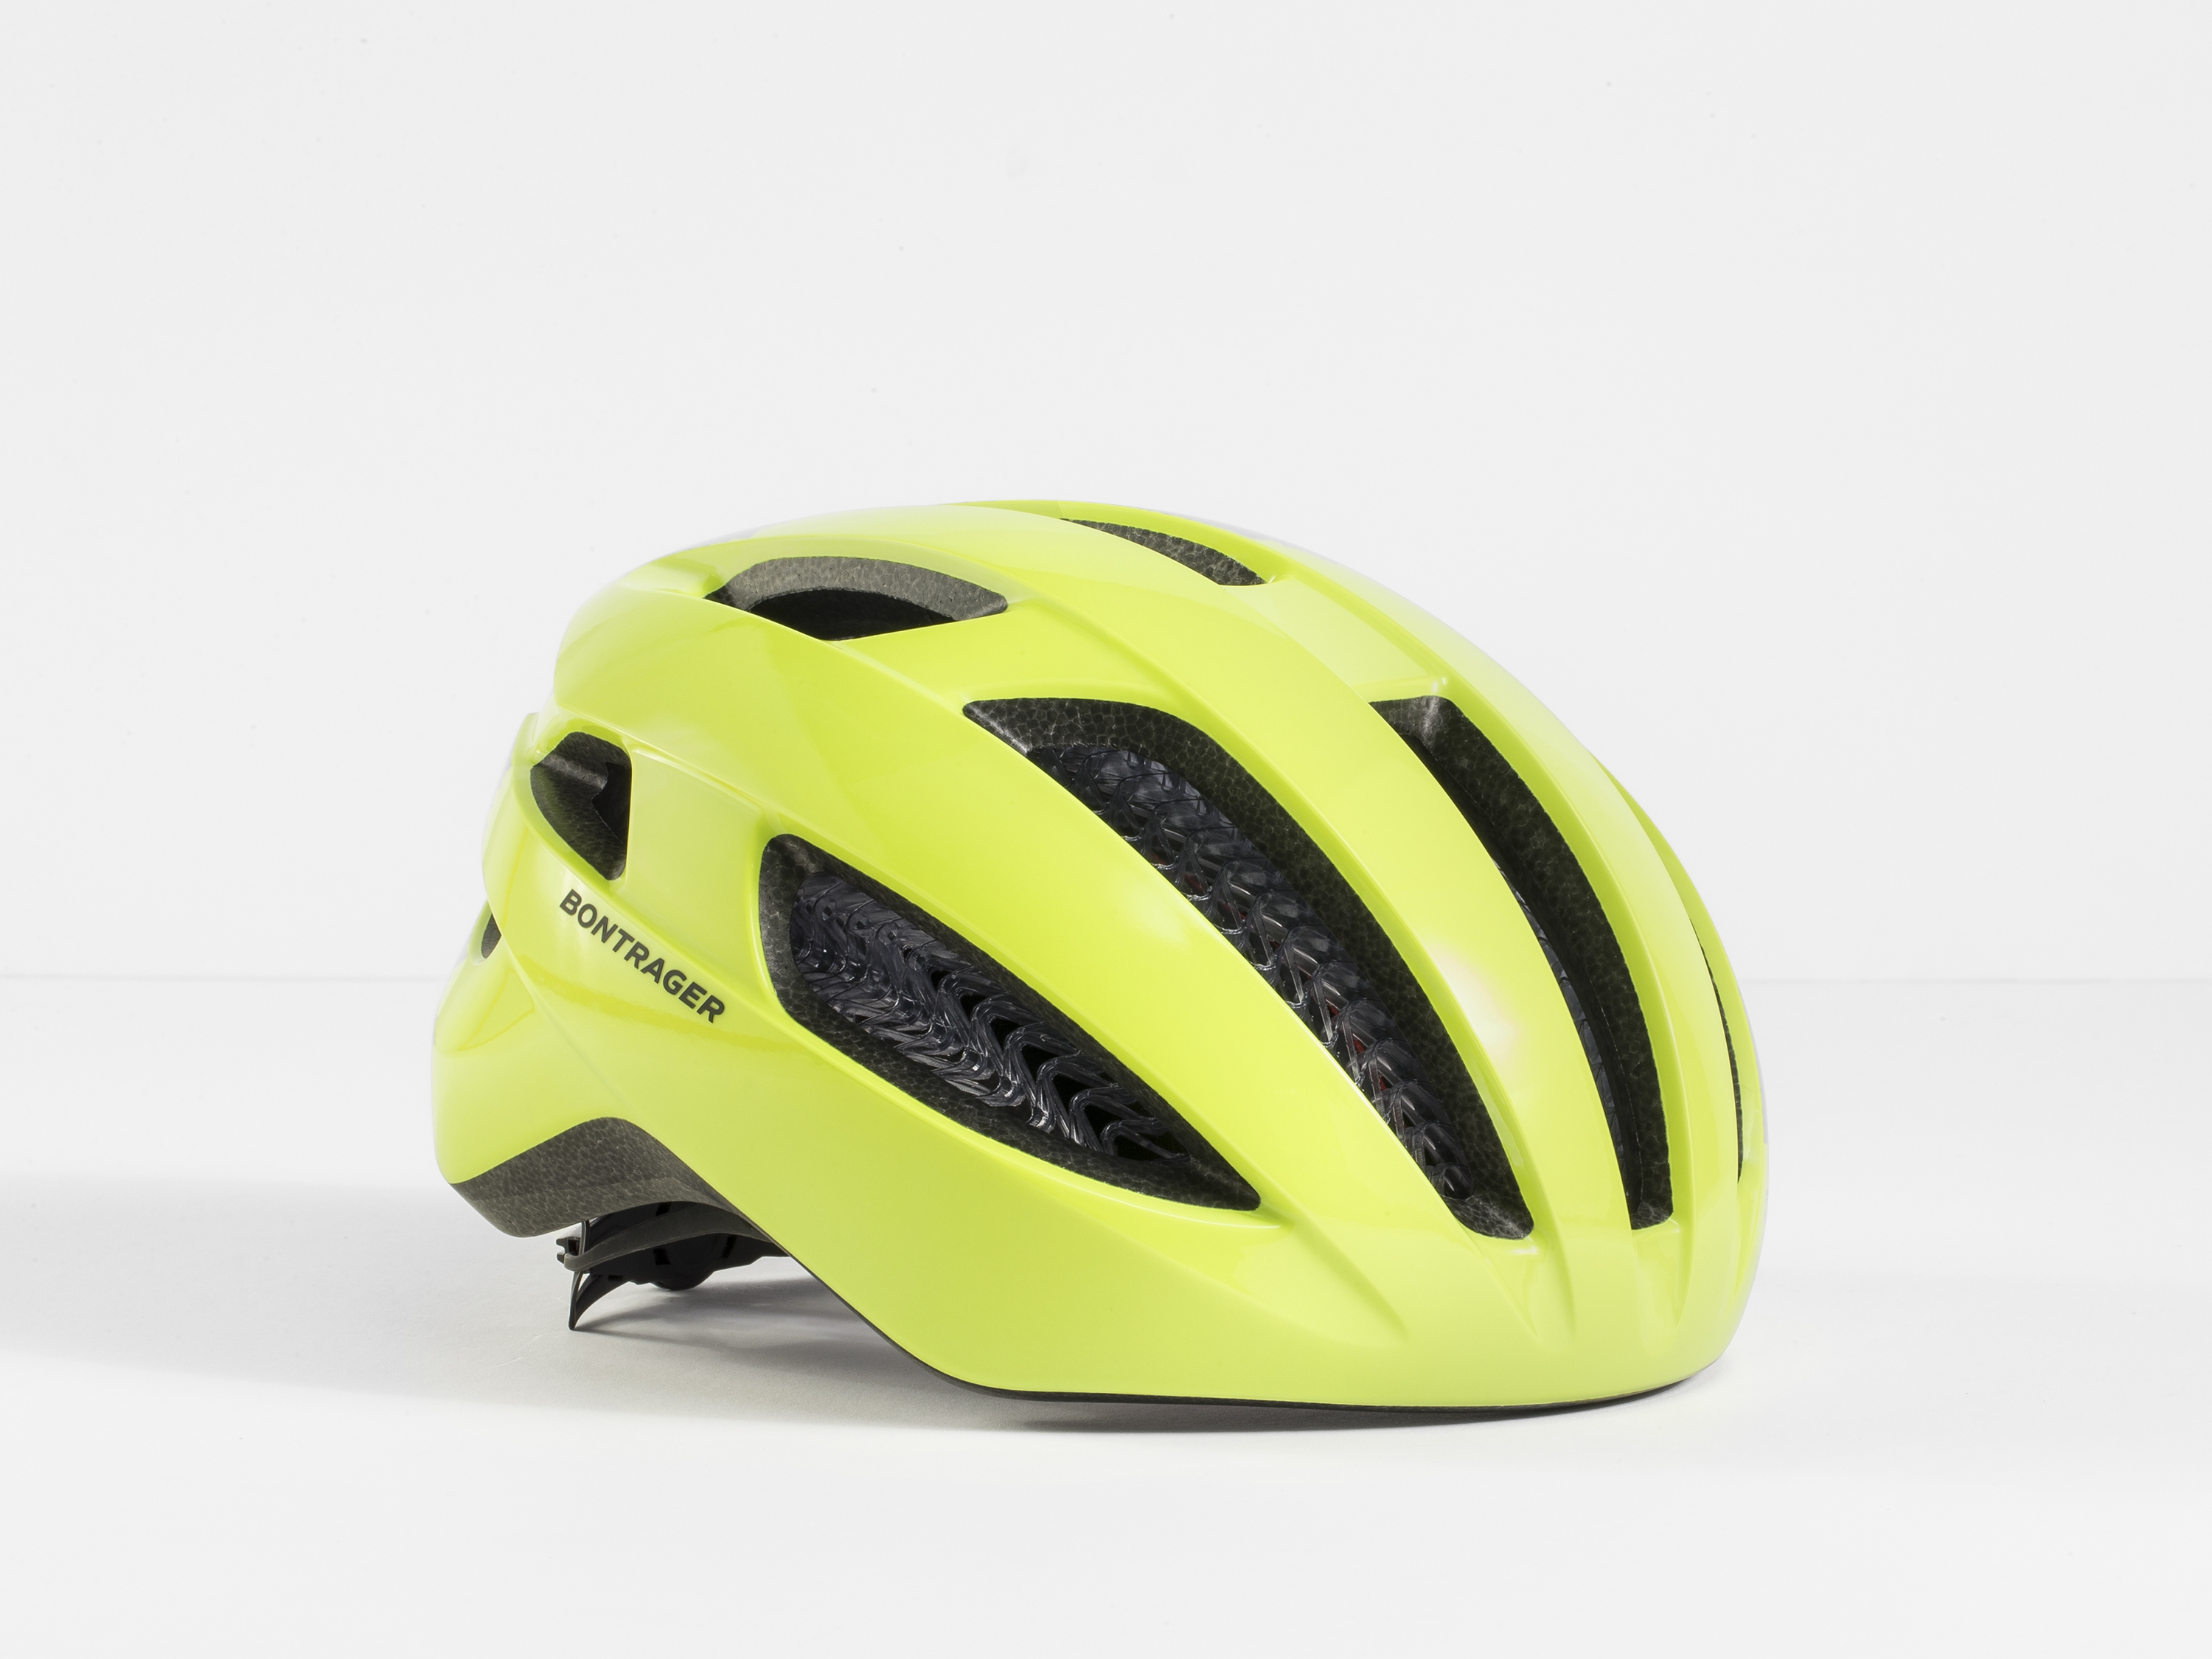 <a href="https://cycles-clement.be/product/bont-casque-starvos-wavecel-l-radioactive-yel/">BONT CASQUE STARVOS WAVECEL L RADIOACTIVE YEL</a>